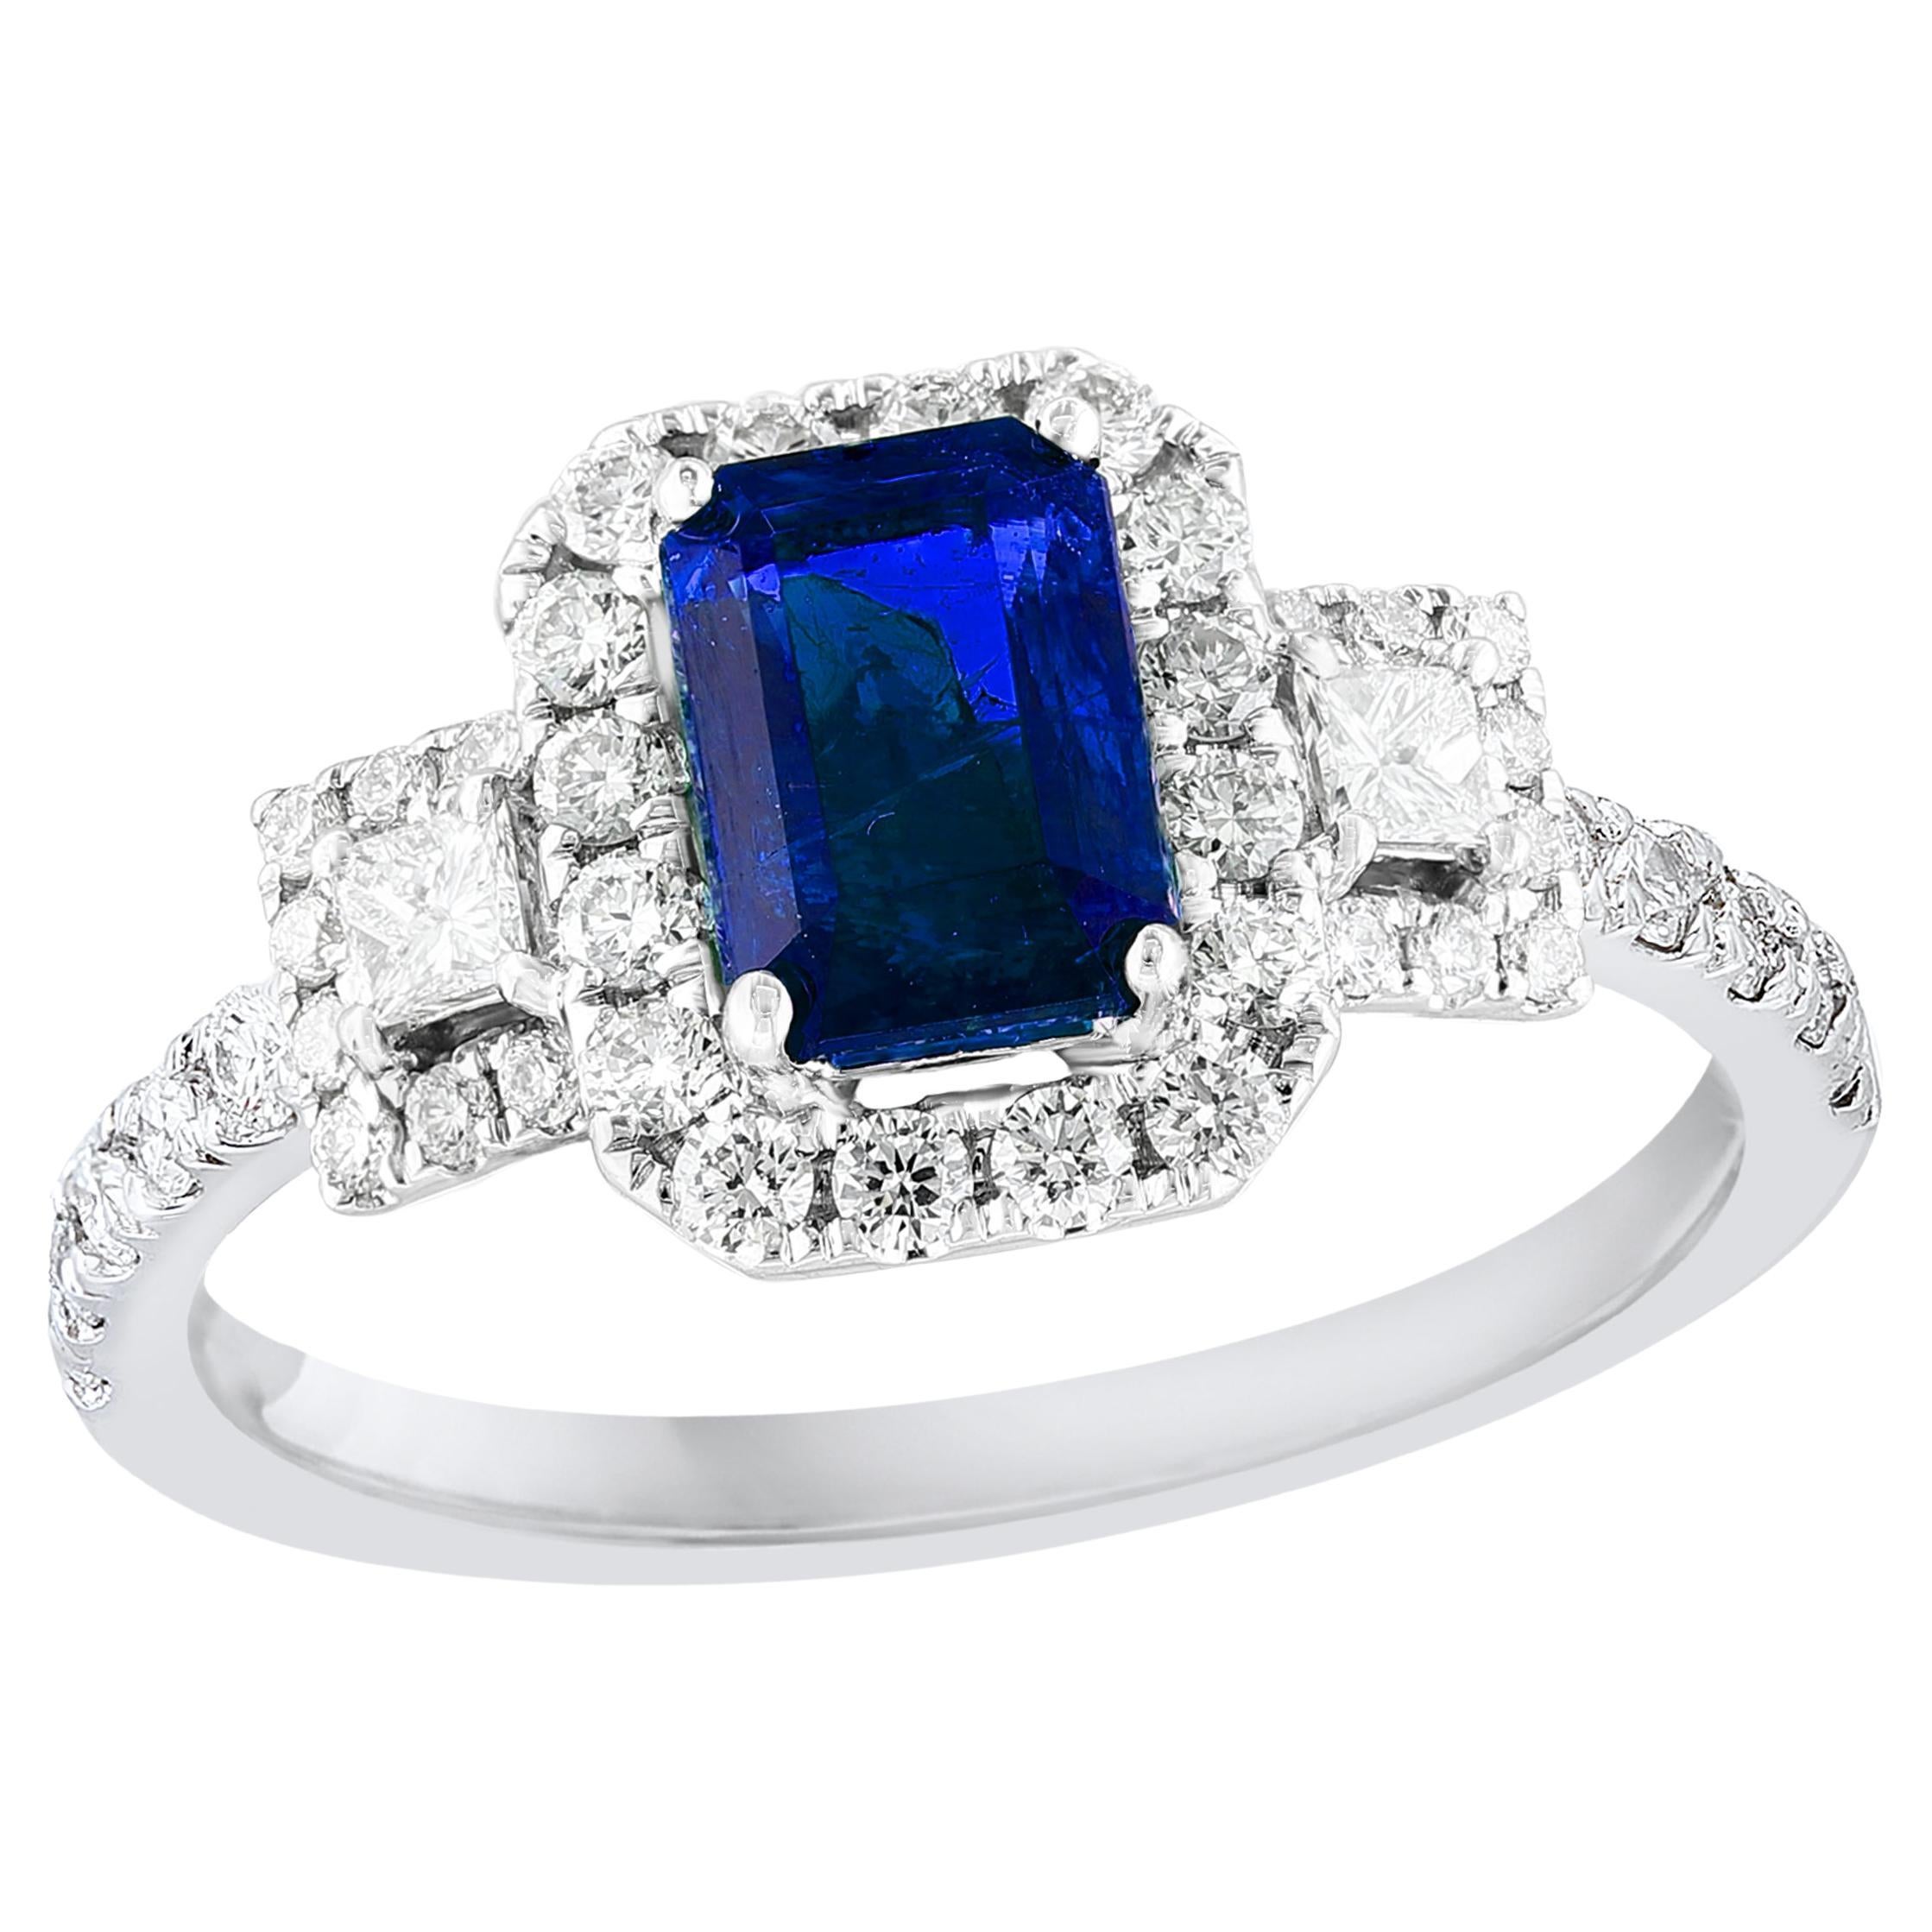 1.21 Carat Emerald Cut Blue Sapphire and Diamond Halo Ring in 18K White Gold For Sale